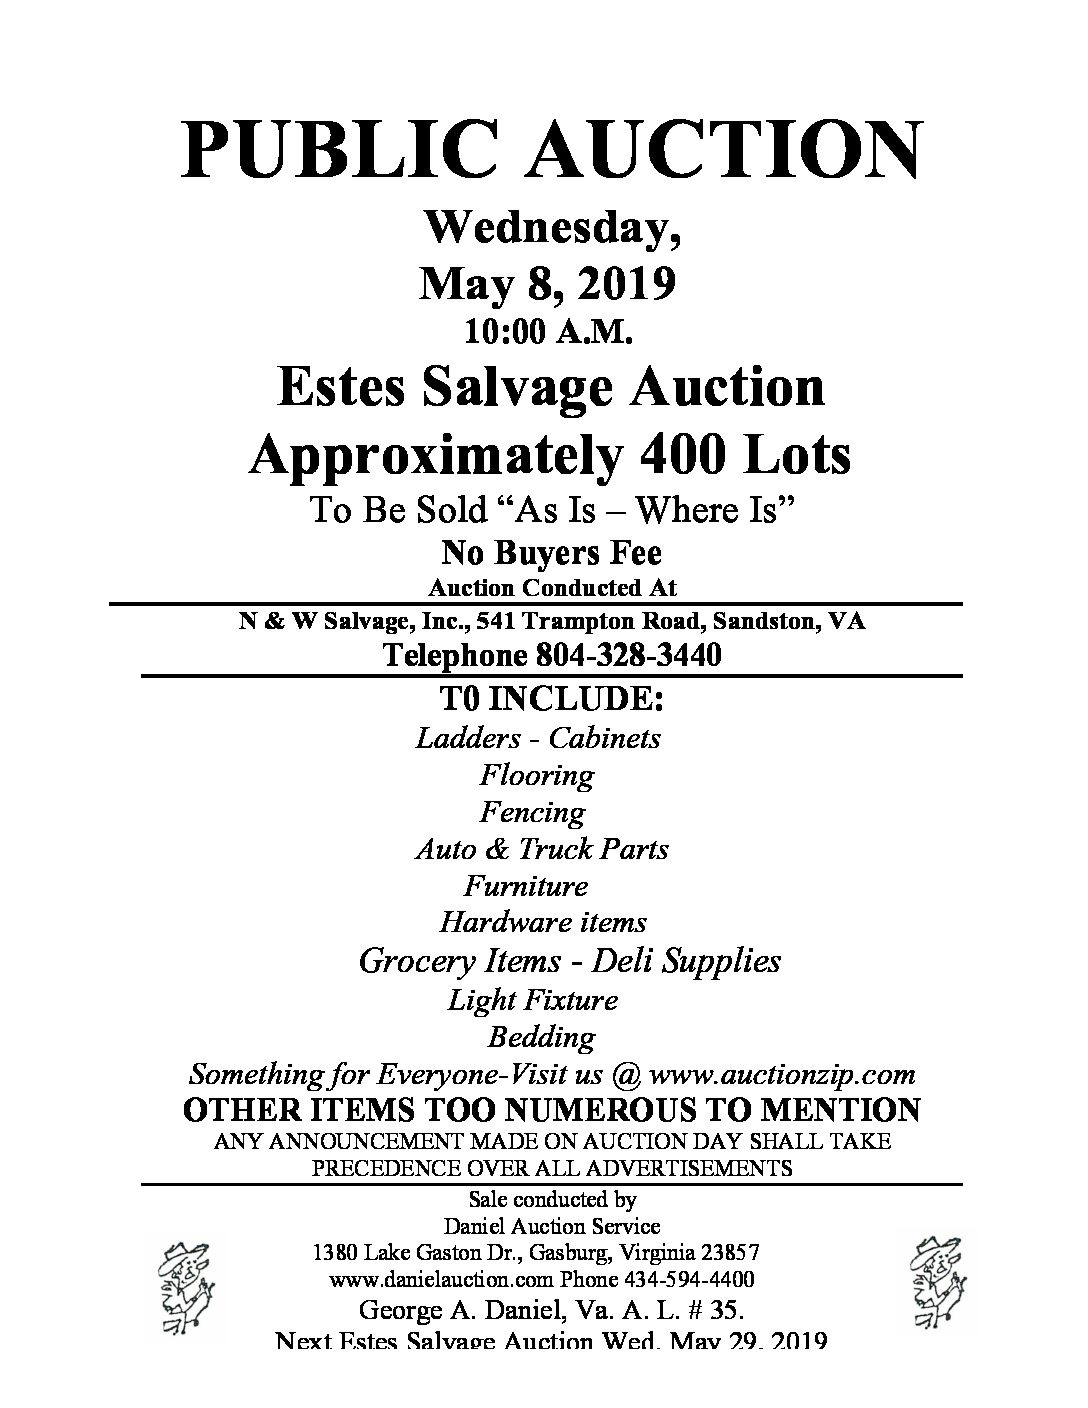 Wed May 18 2019 Estes Salvage Auction